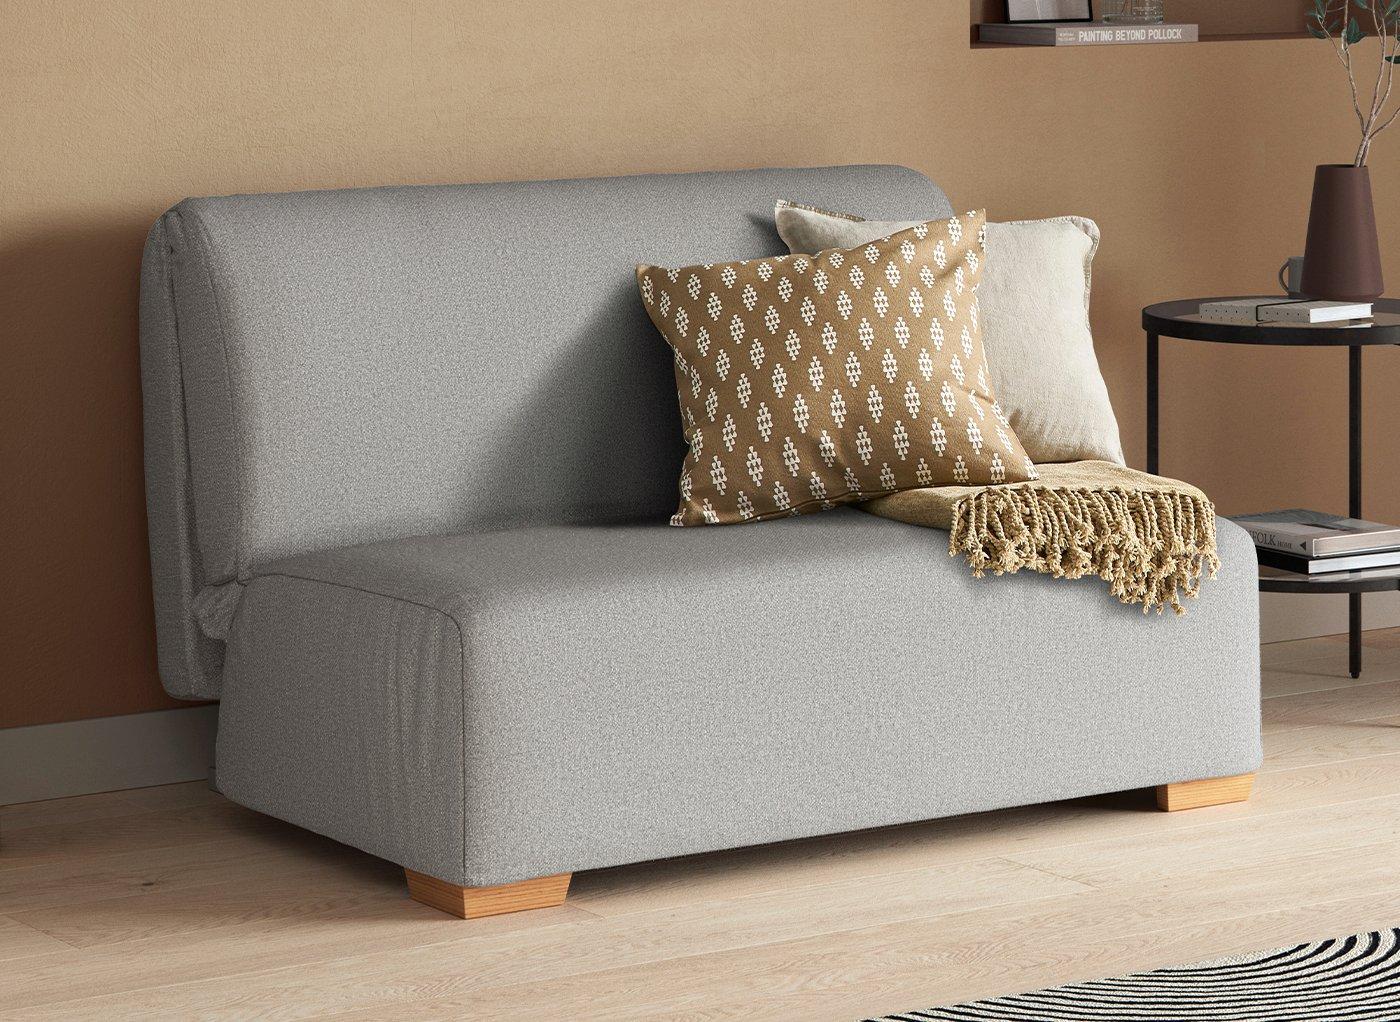 Cork 2 Seater 4'0 A-Frame Sofa Bed - Silver Small Double